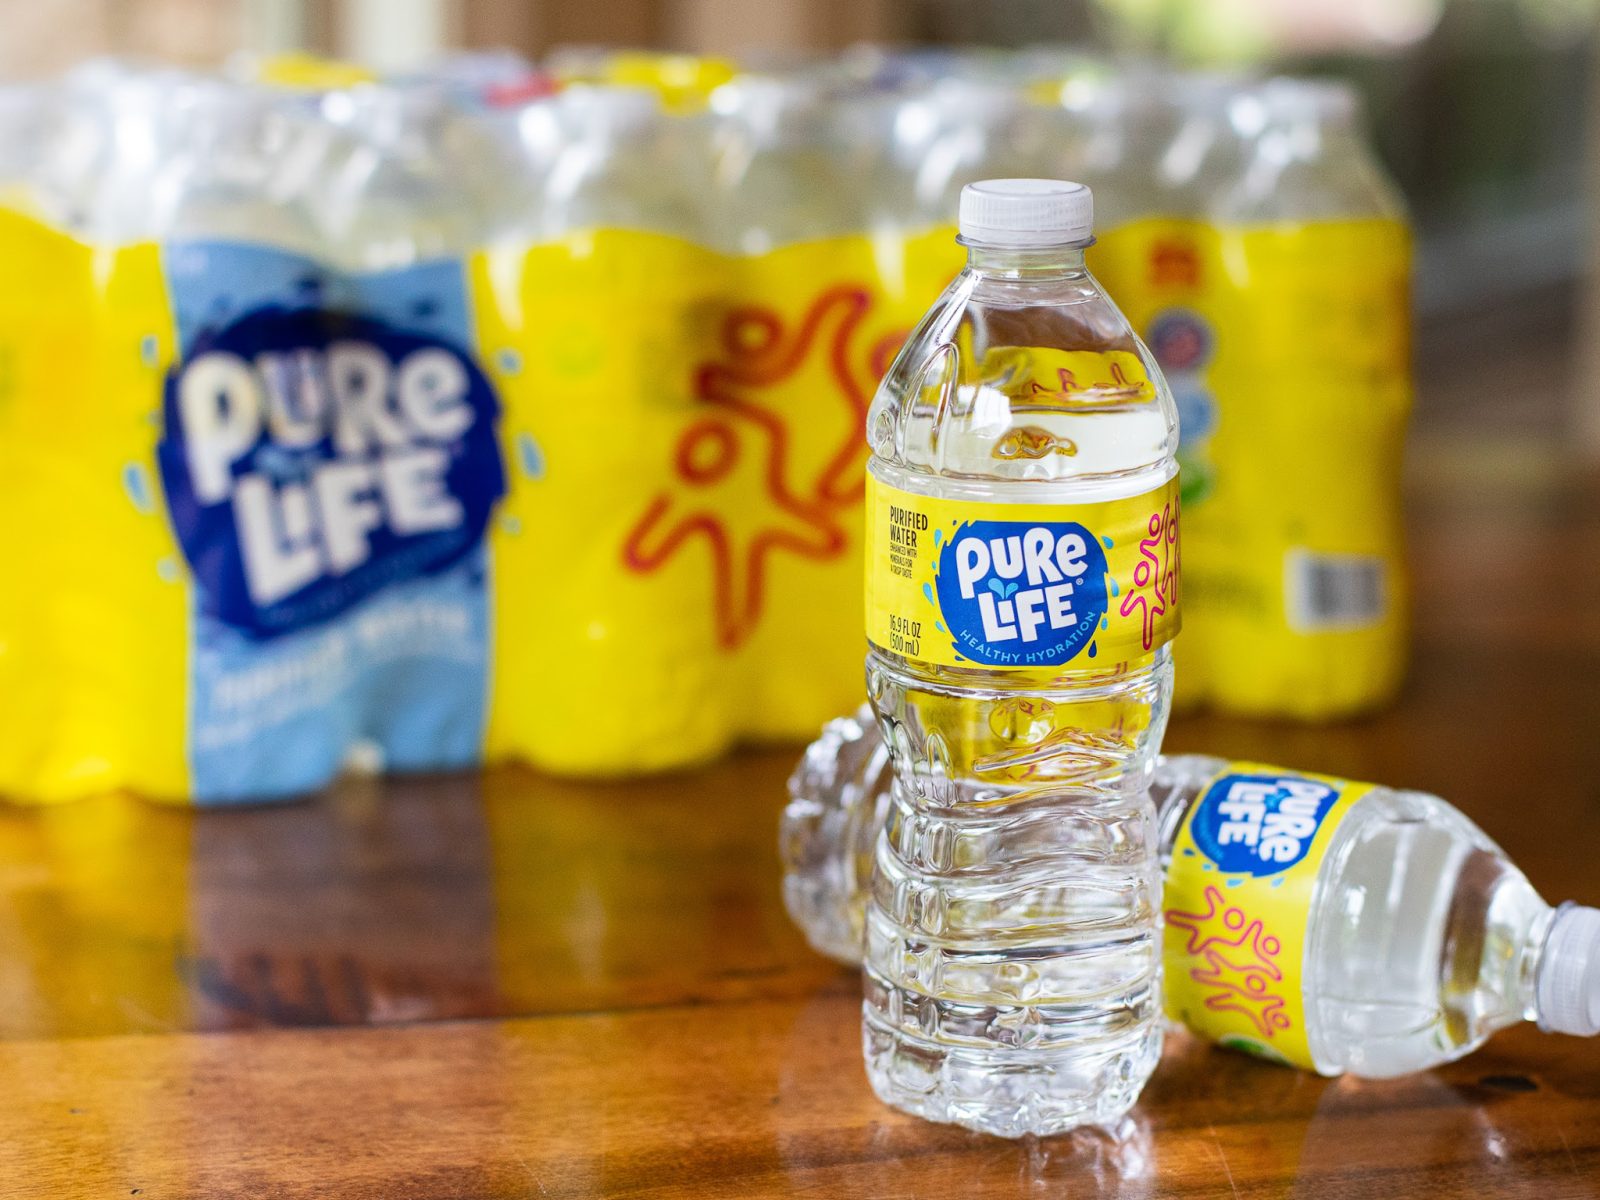 Pure Life Purified Drinking Water As Low As $2.49 At Kroger